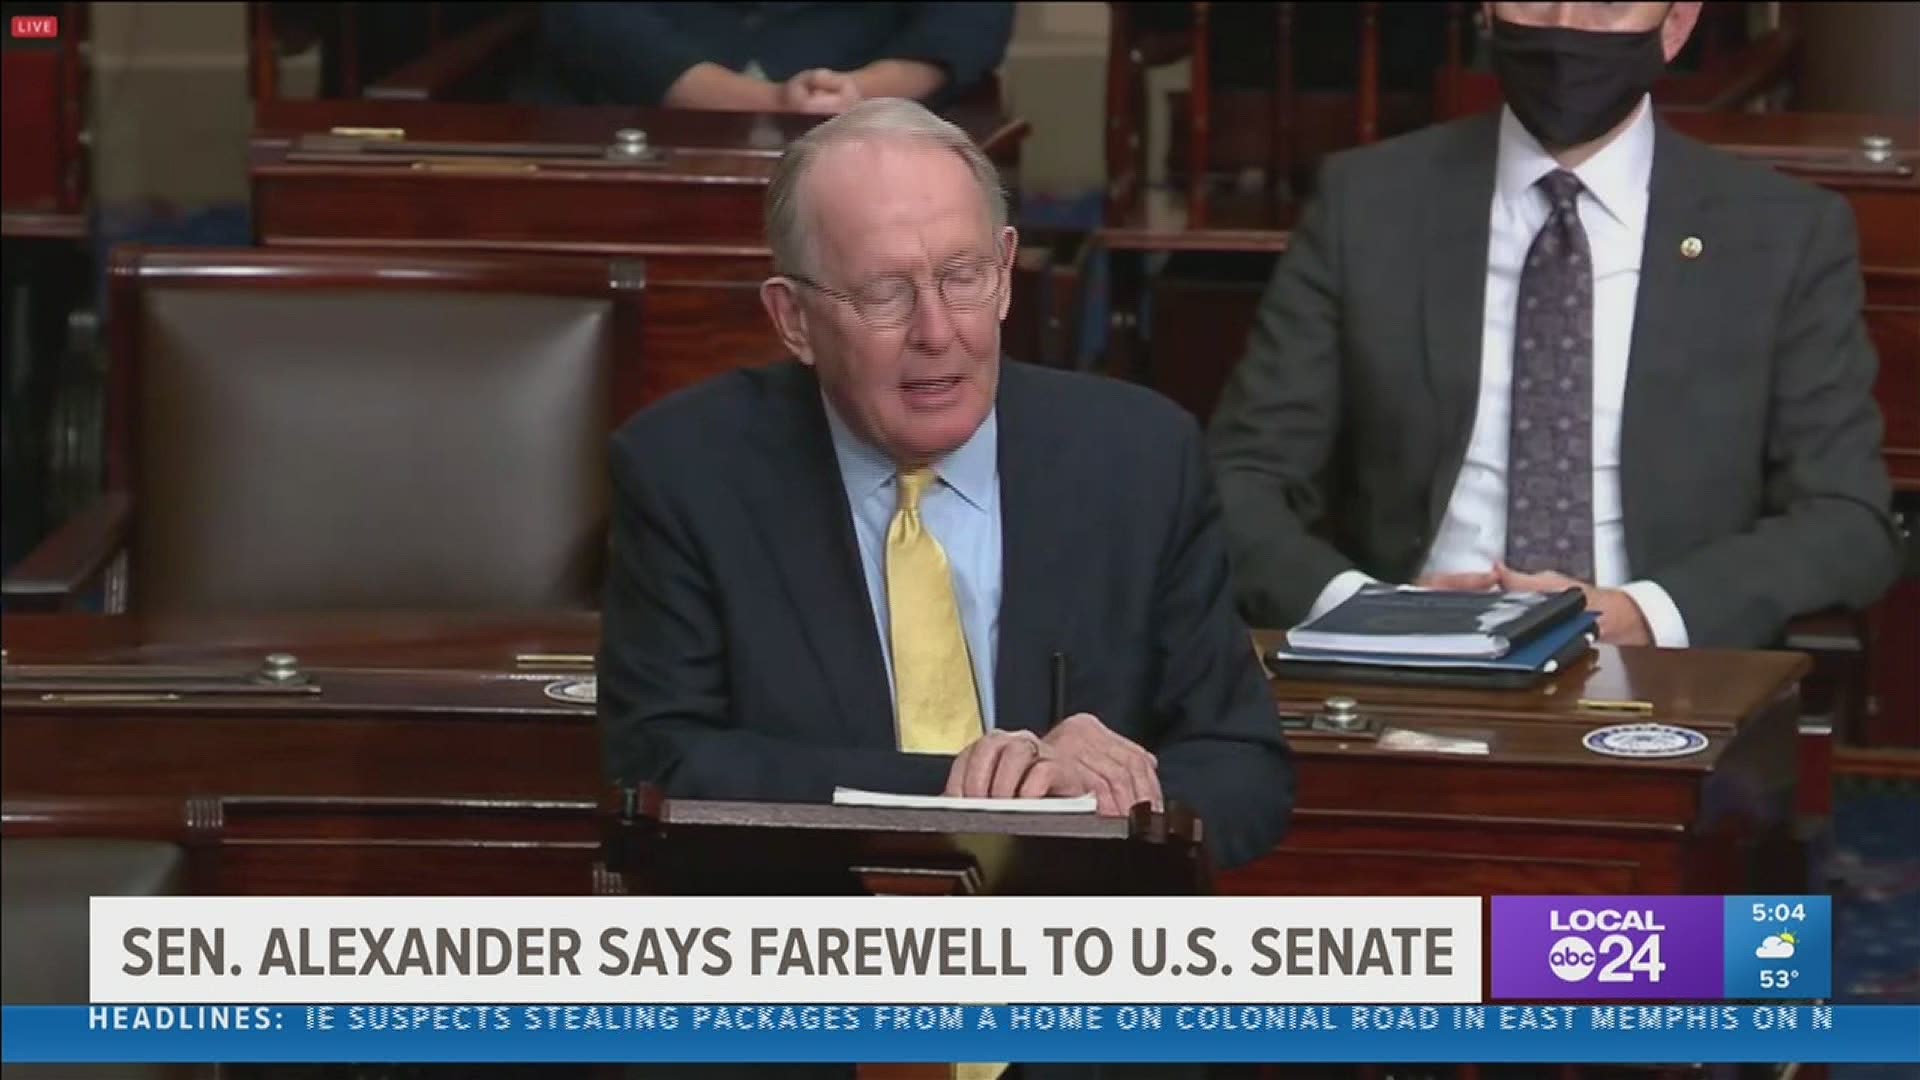 Senator Alexander is retiring after many years serving the public.